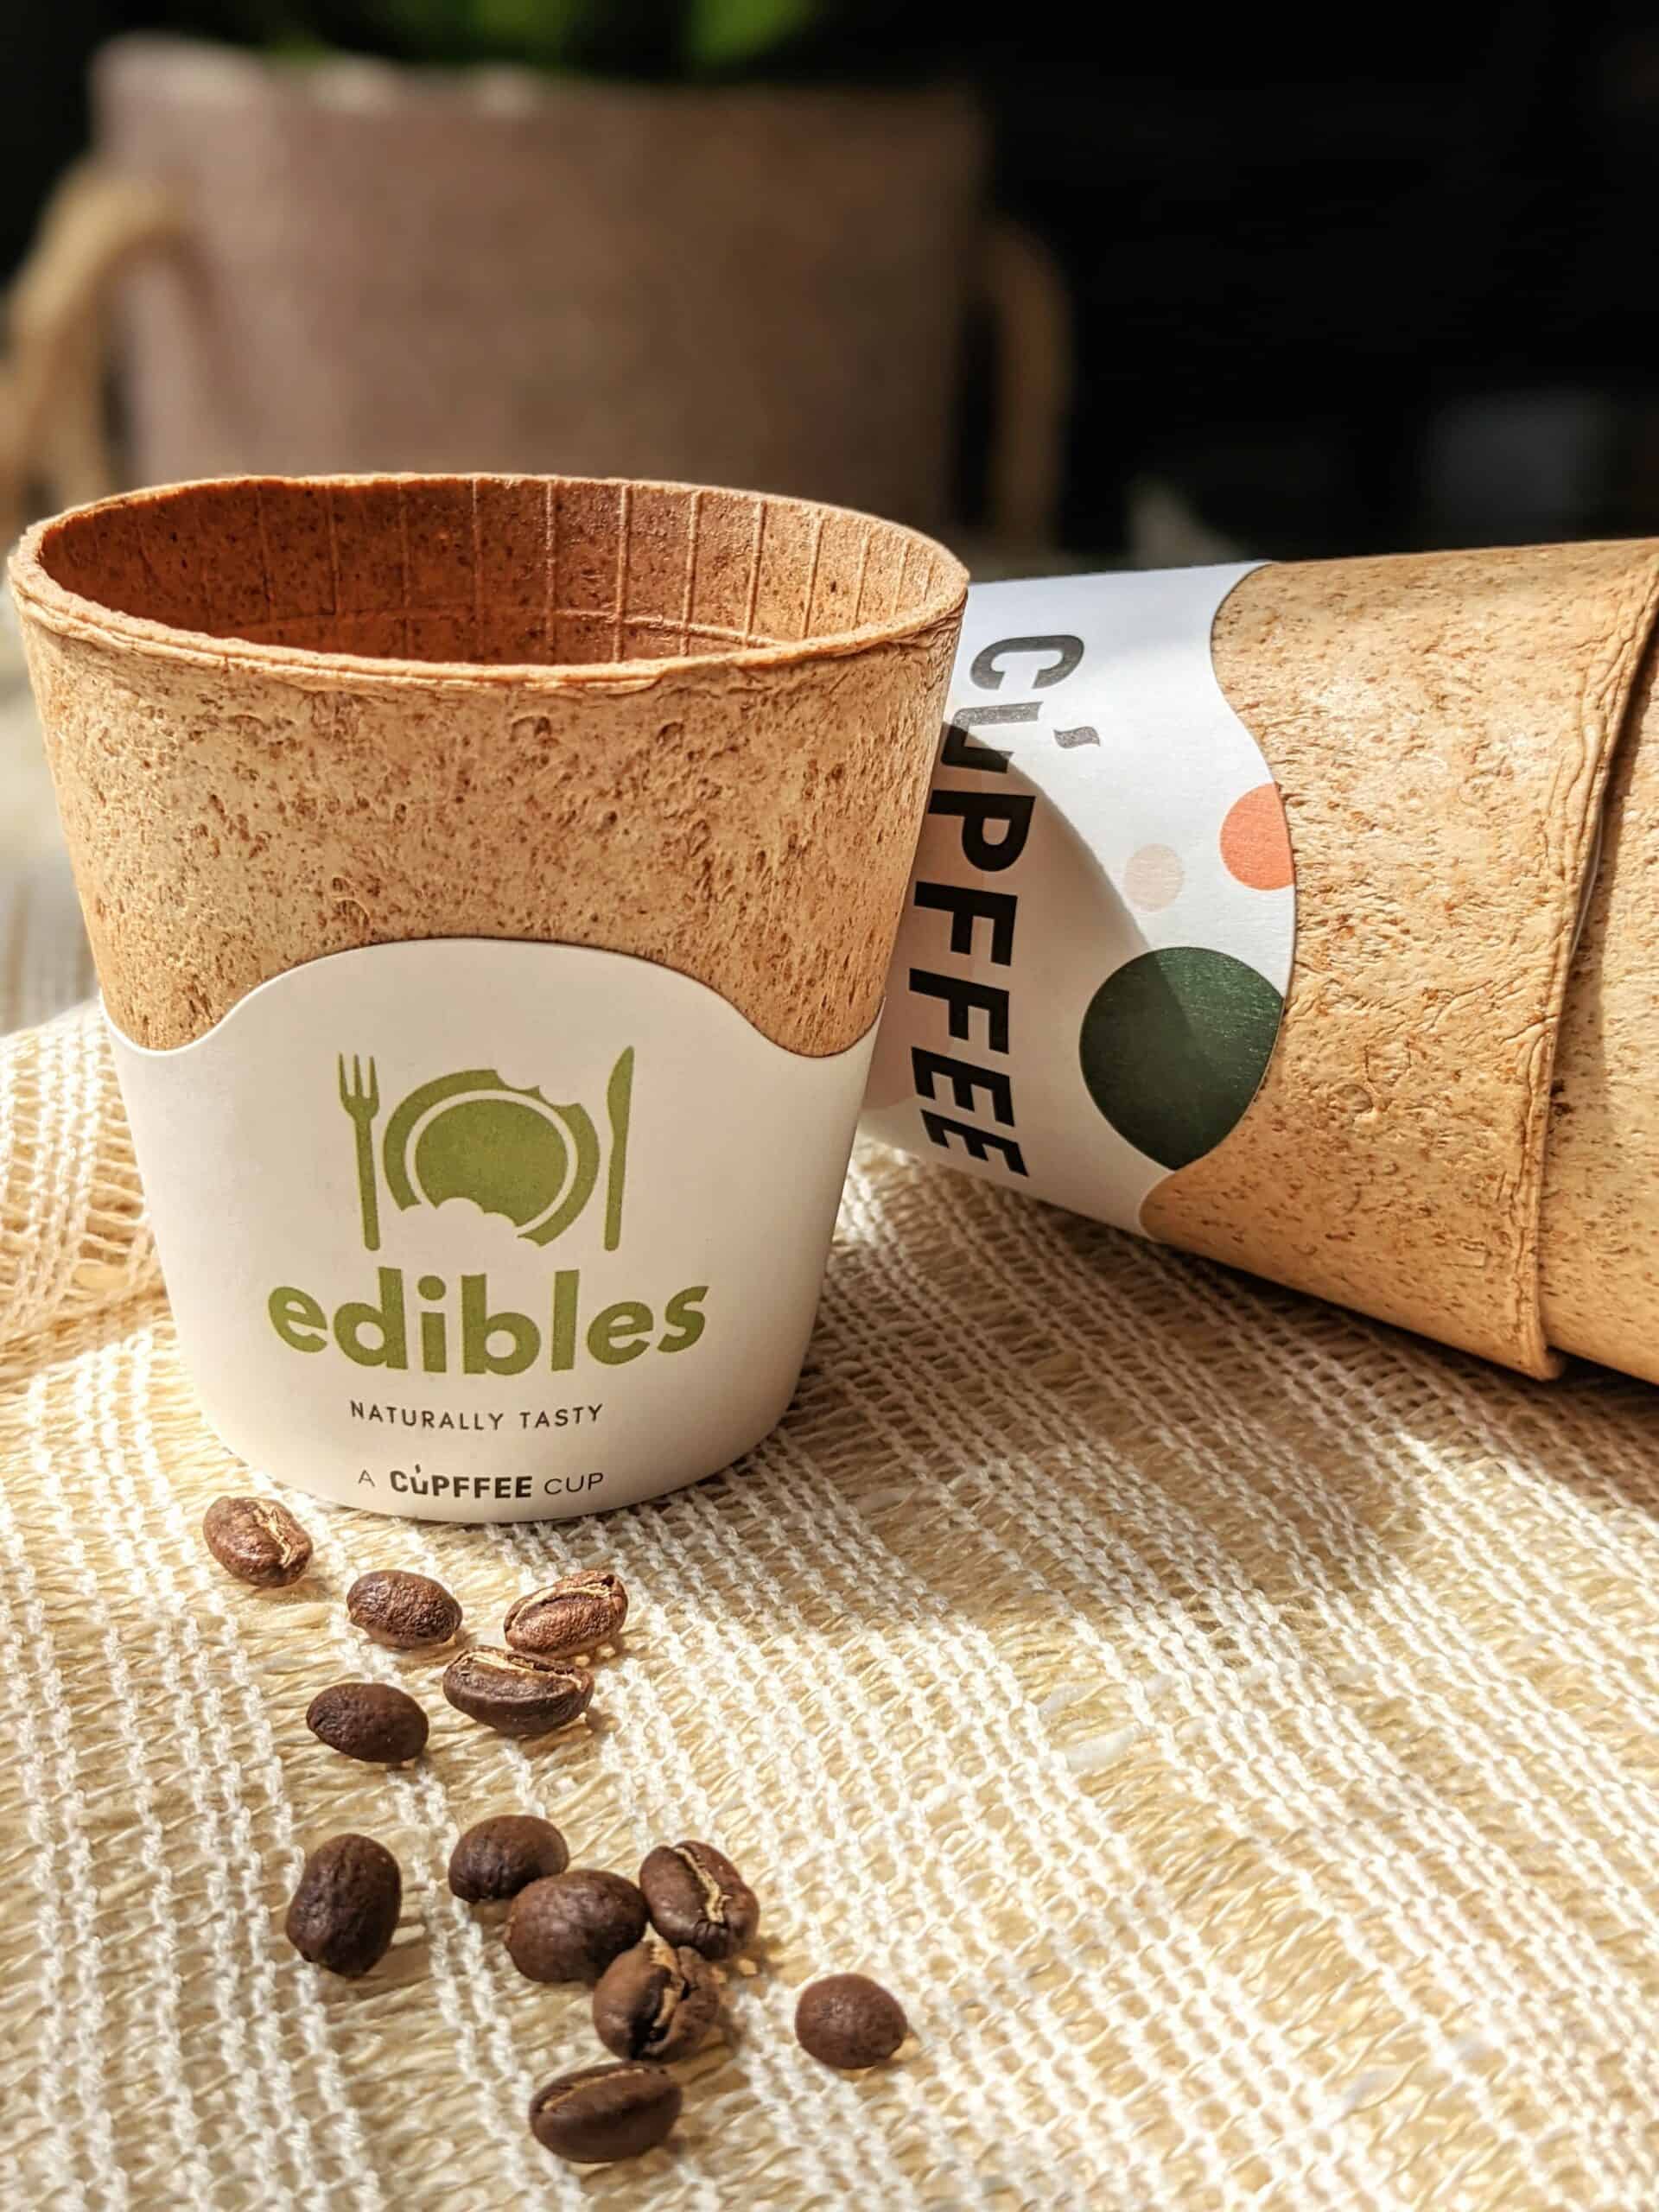 Thanks to Edibles, it's the end of plastic and paper drinking cups